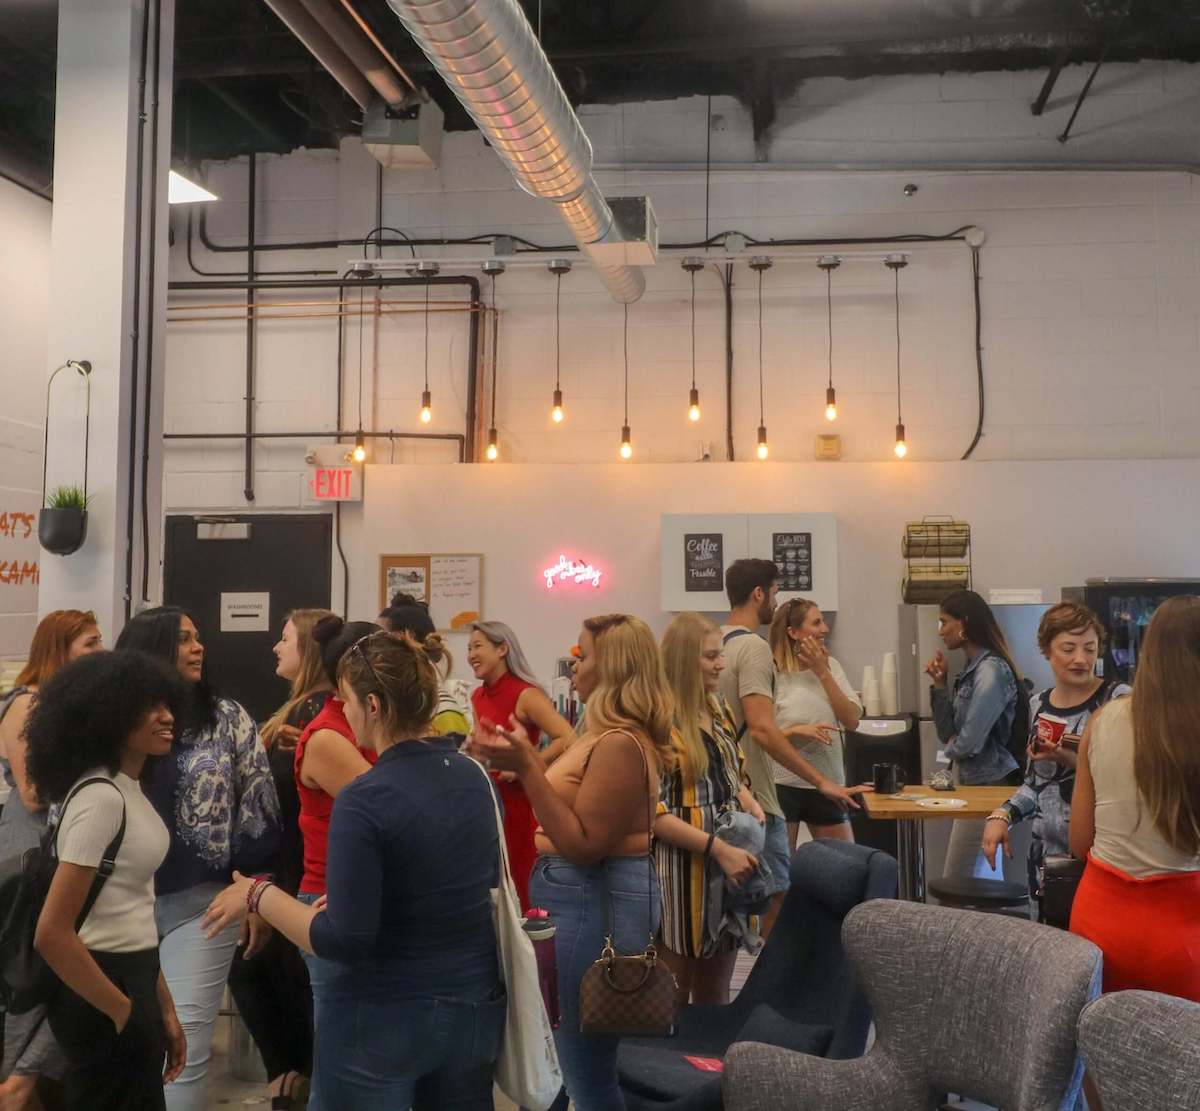 Women Who Freelance is a growing community of women freelancers and entrepreneurs in Canada, gathering together to network, collaborate, and thrive.